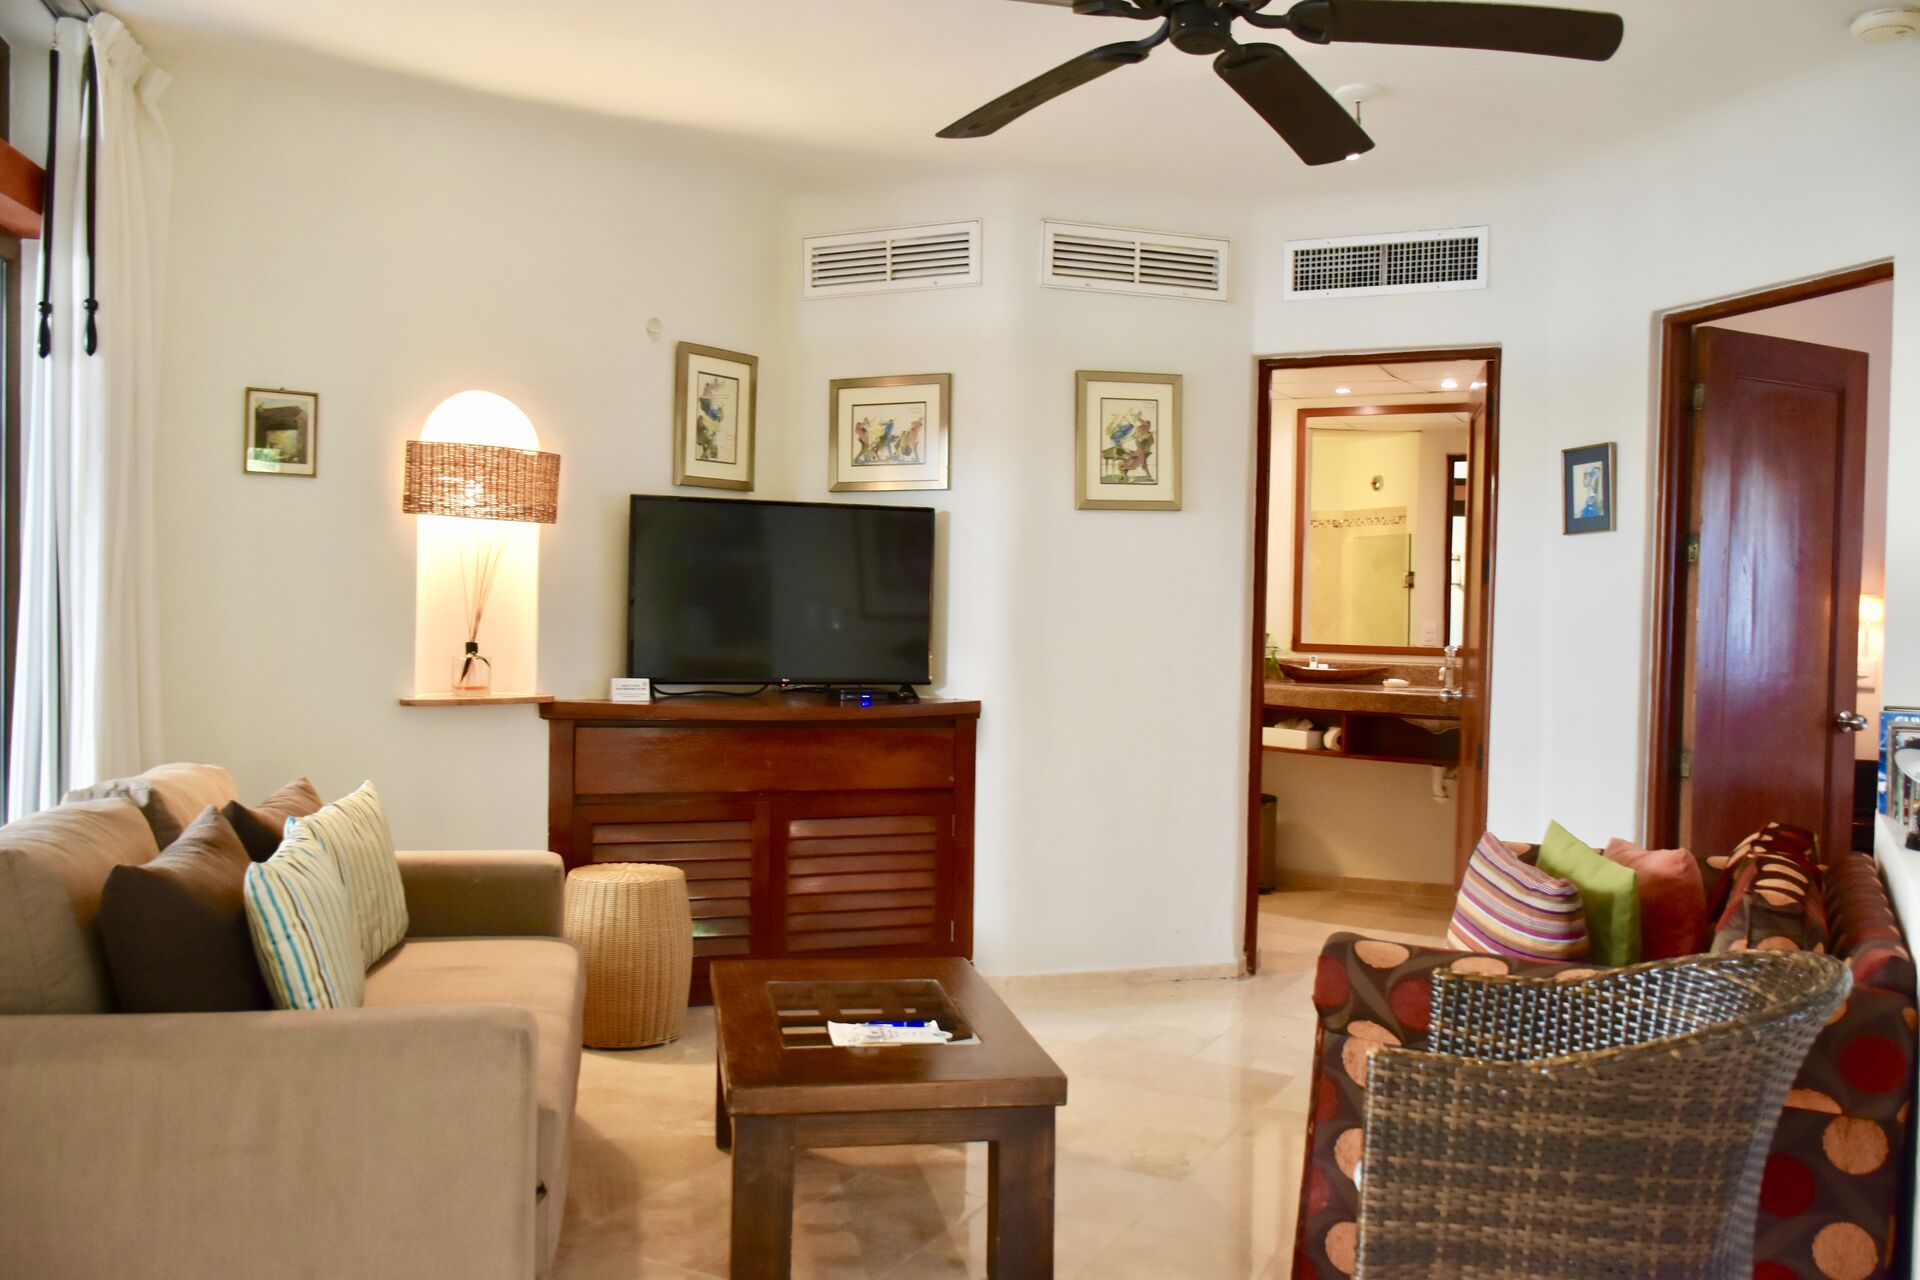 Playa Palms Beach Hotel, amazing 1 bedroom suite with two queen size beds and kitchenette.